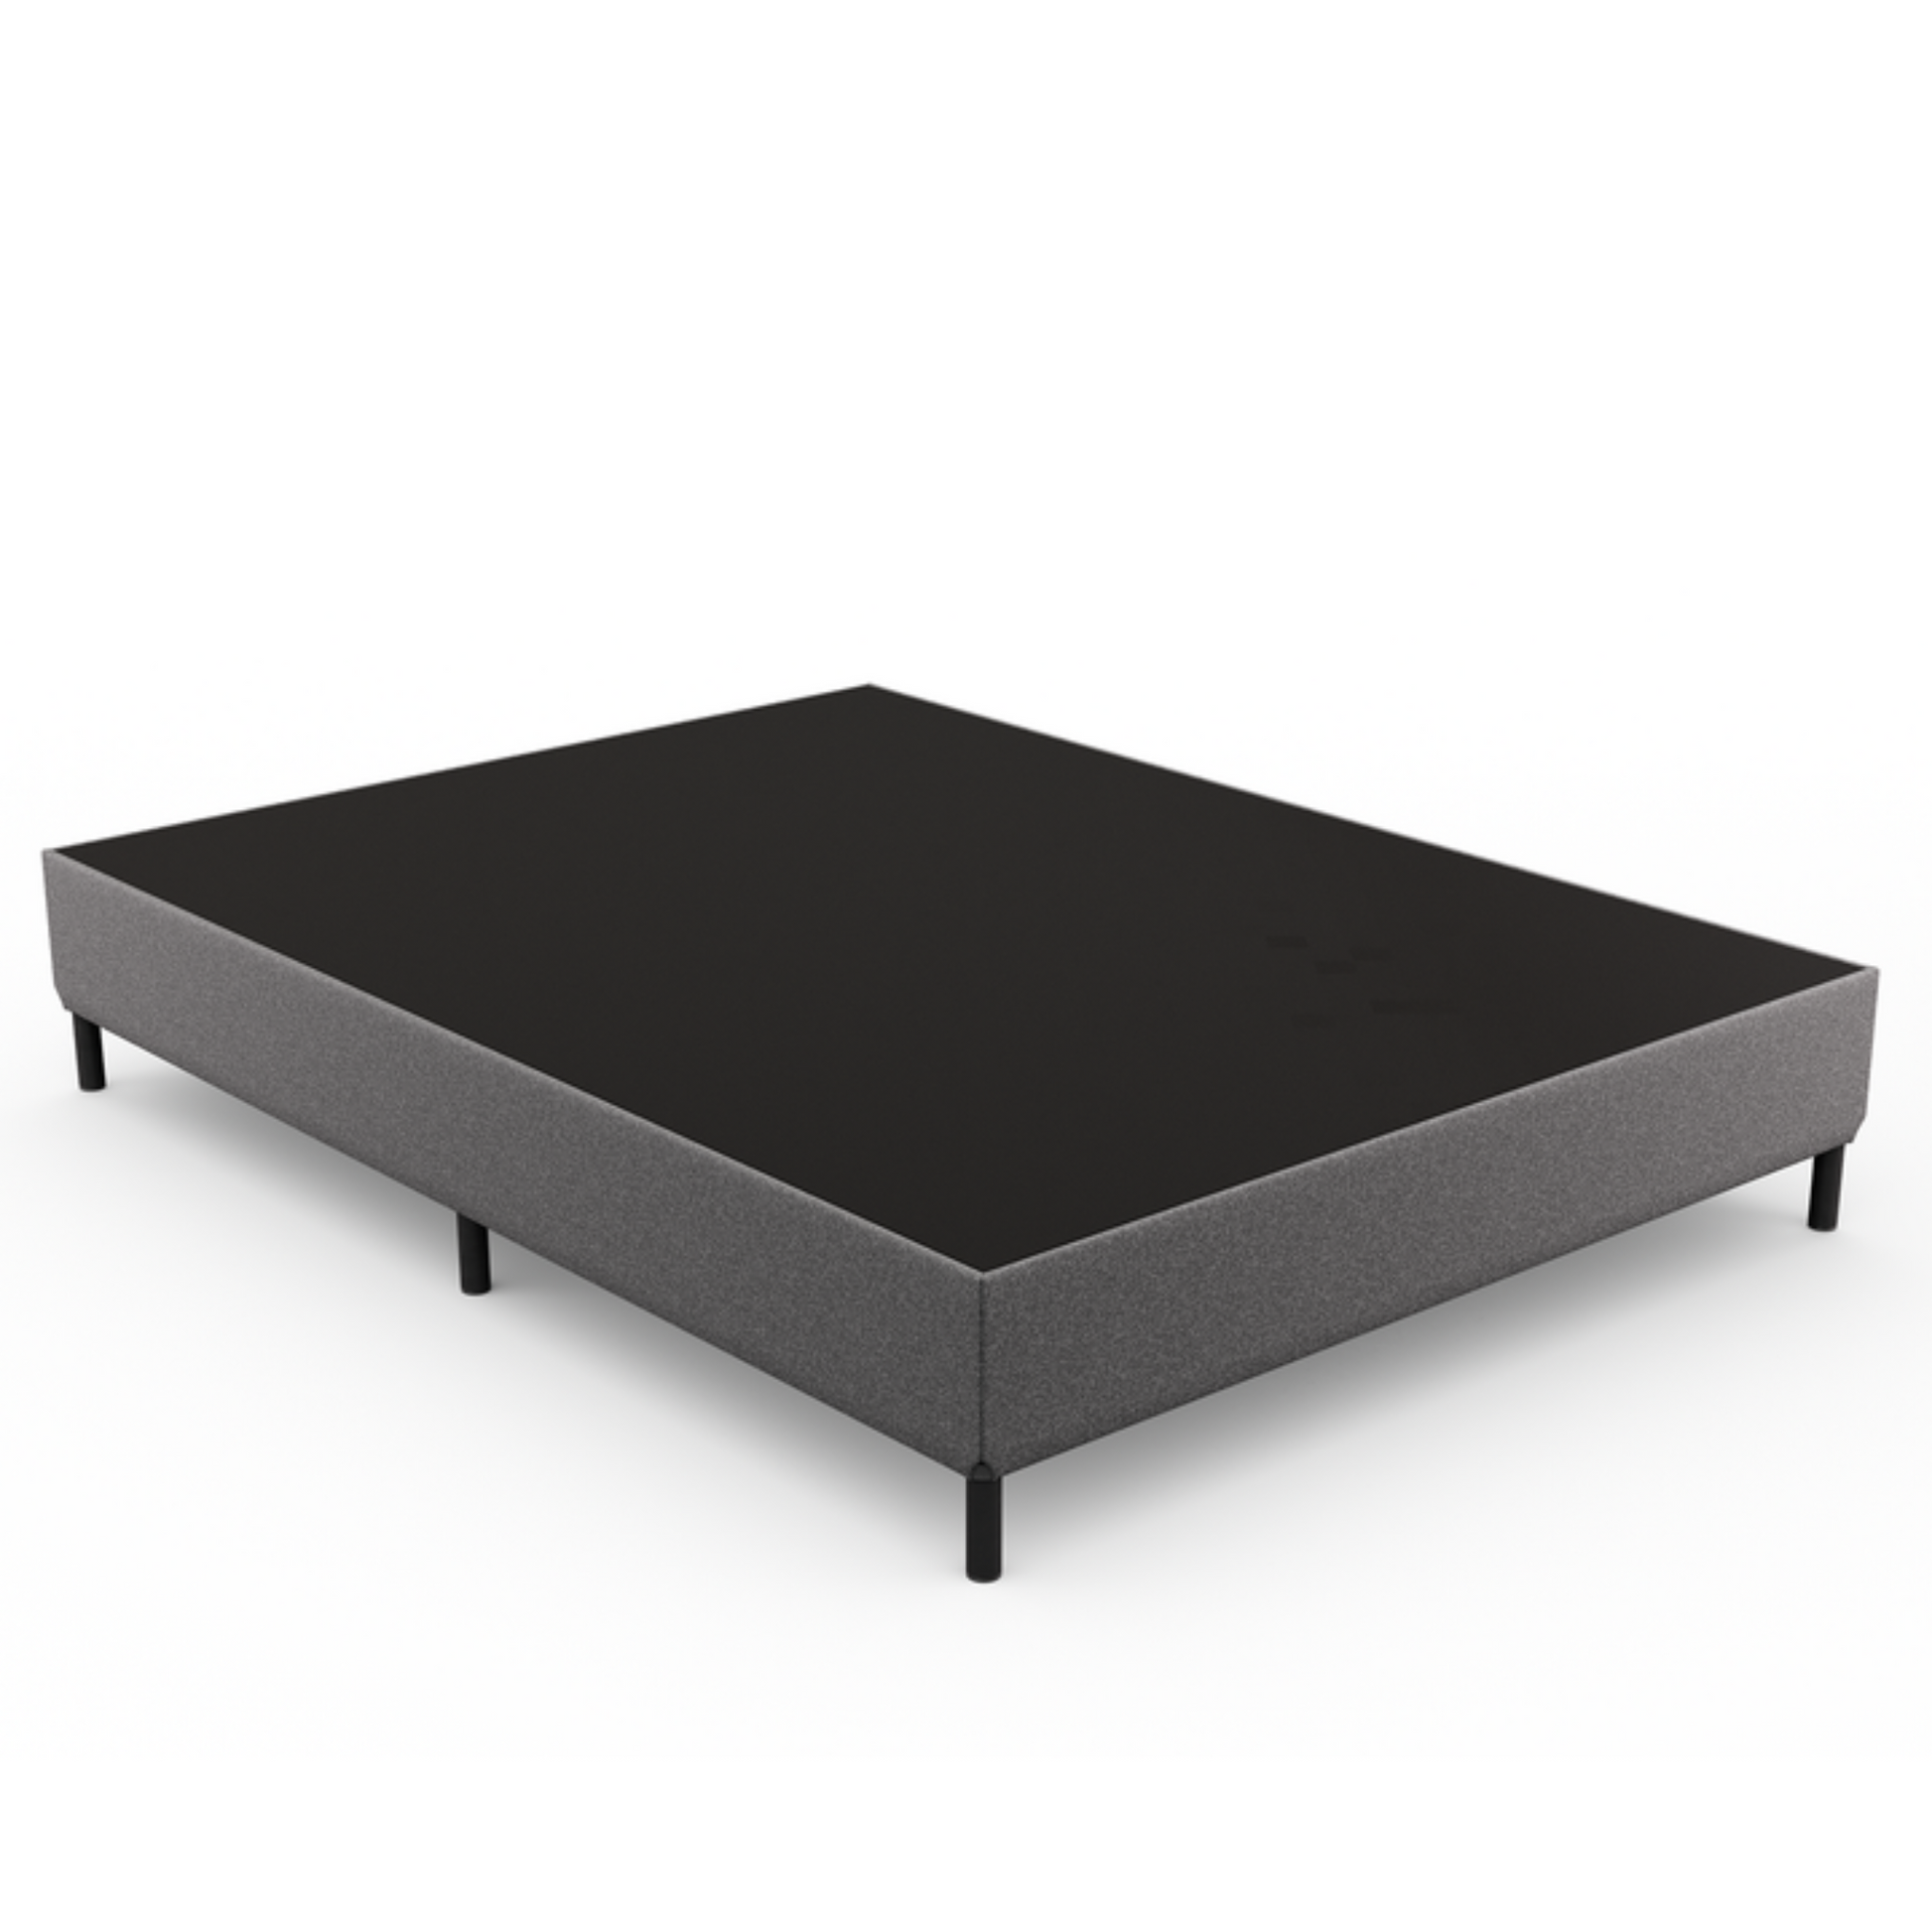 Doms 14" Box Spring With Legs, Corner View